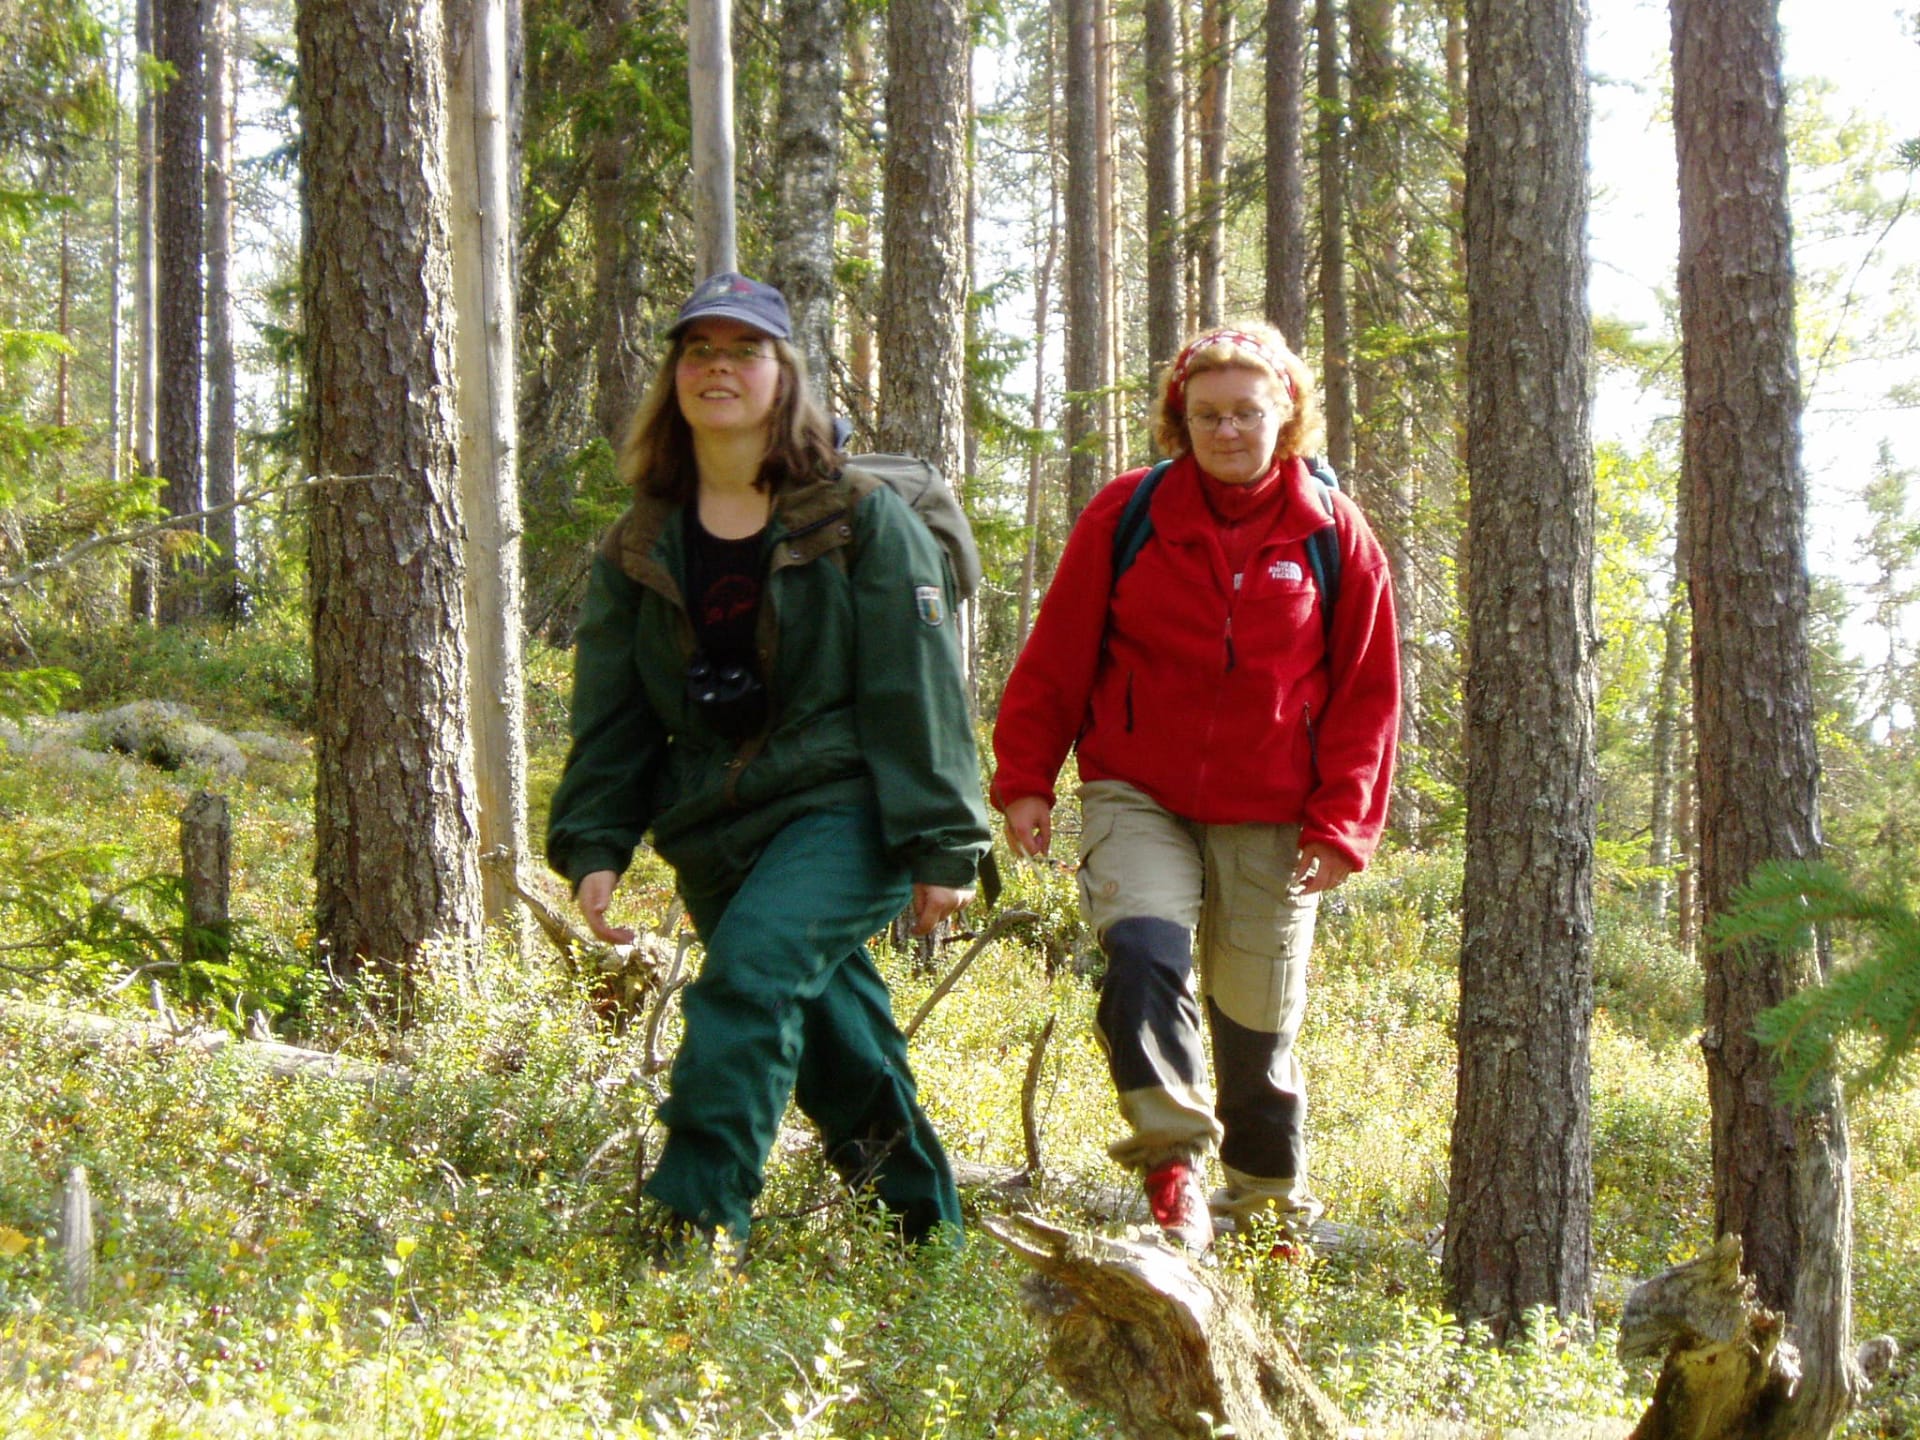 Hiking in forest in Kuhmo area.